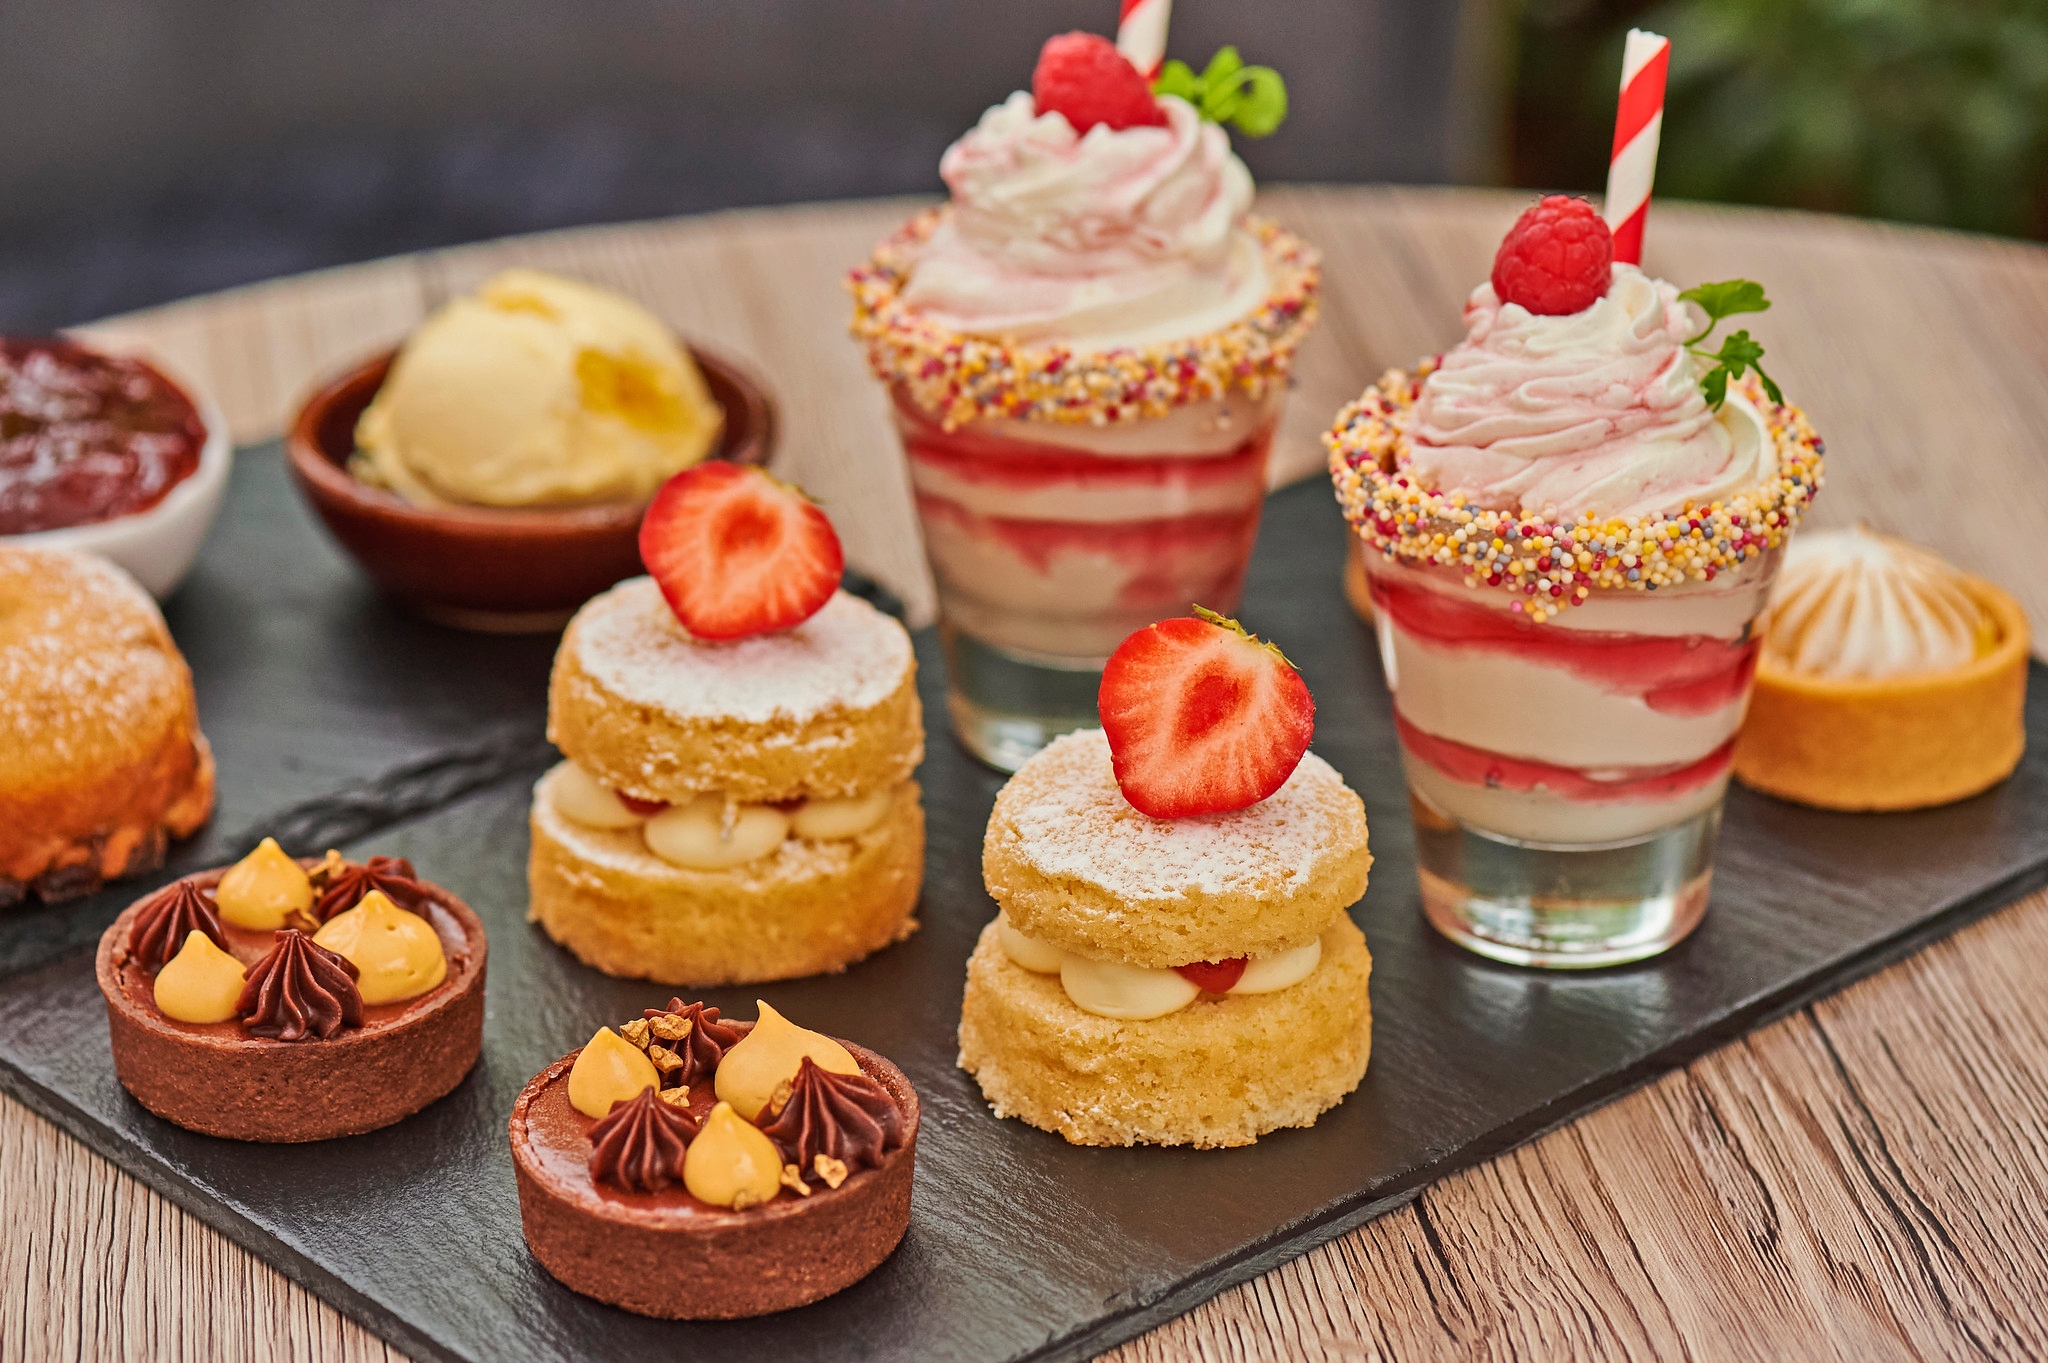 Sweet selection of cakes desserts and tarts at Malmaison Leeds